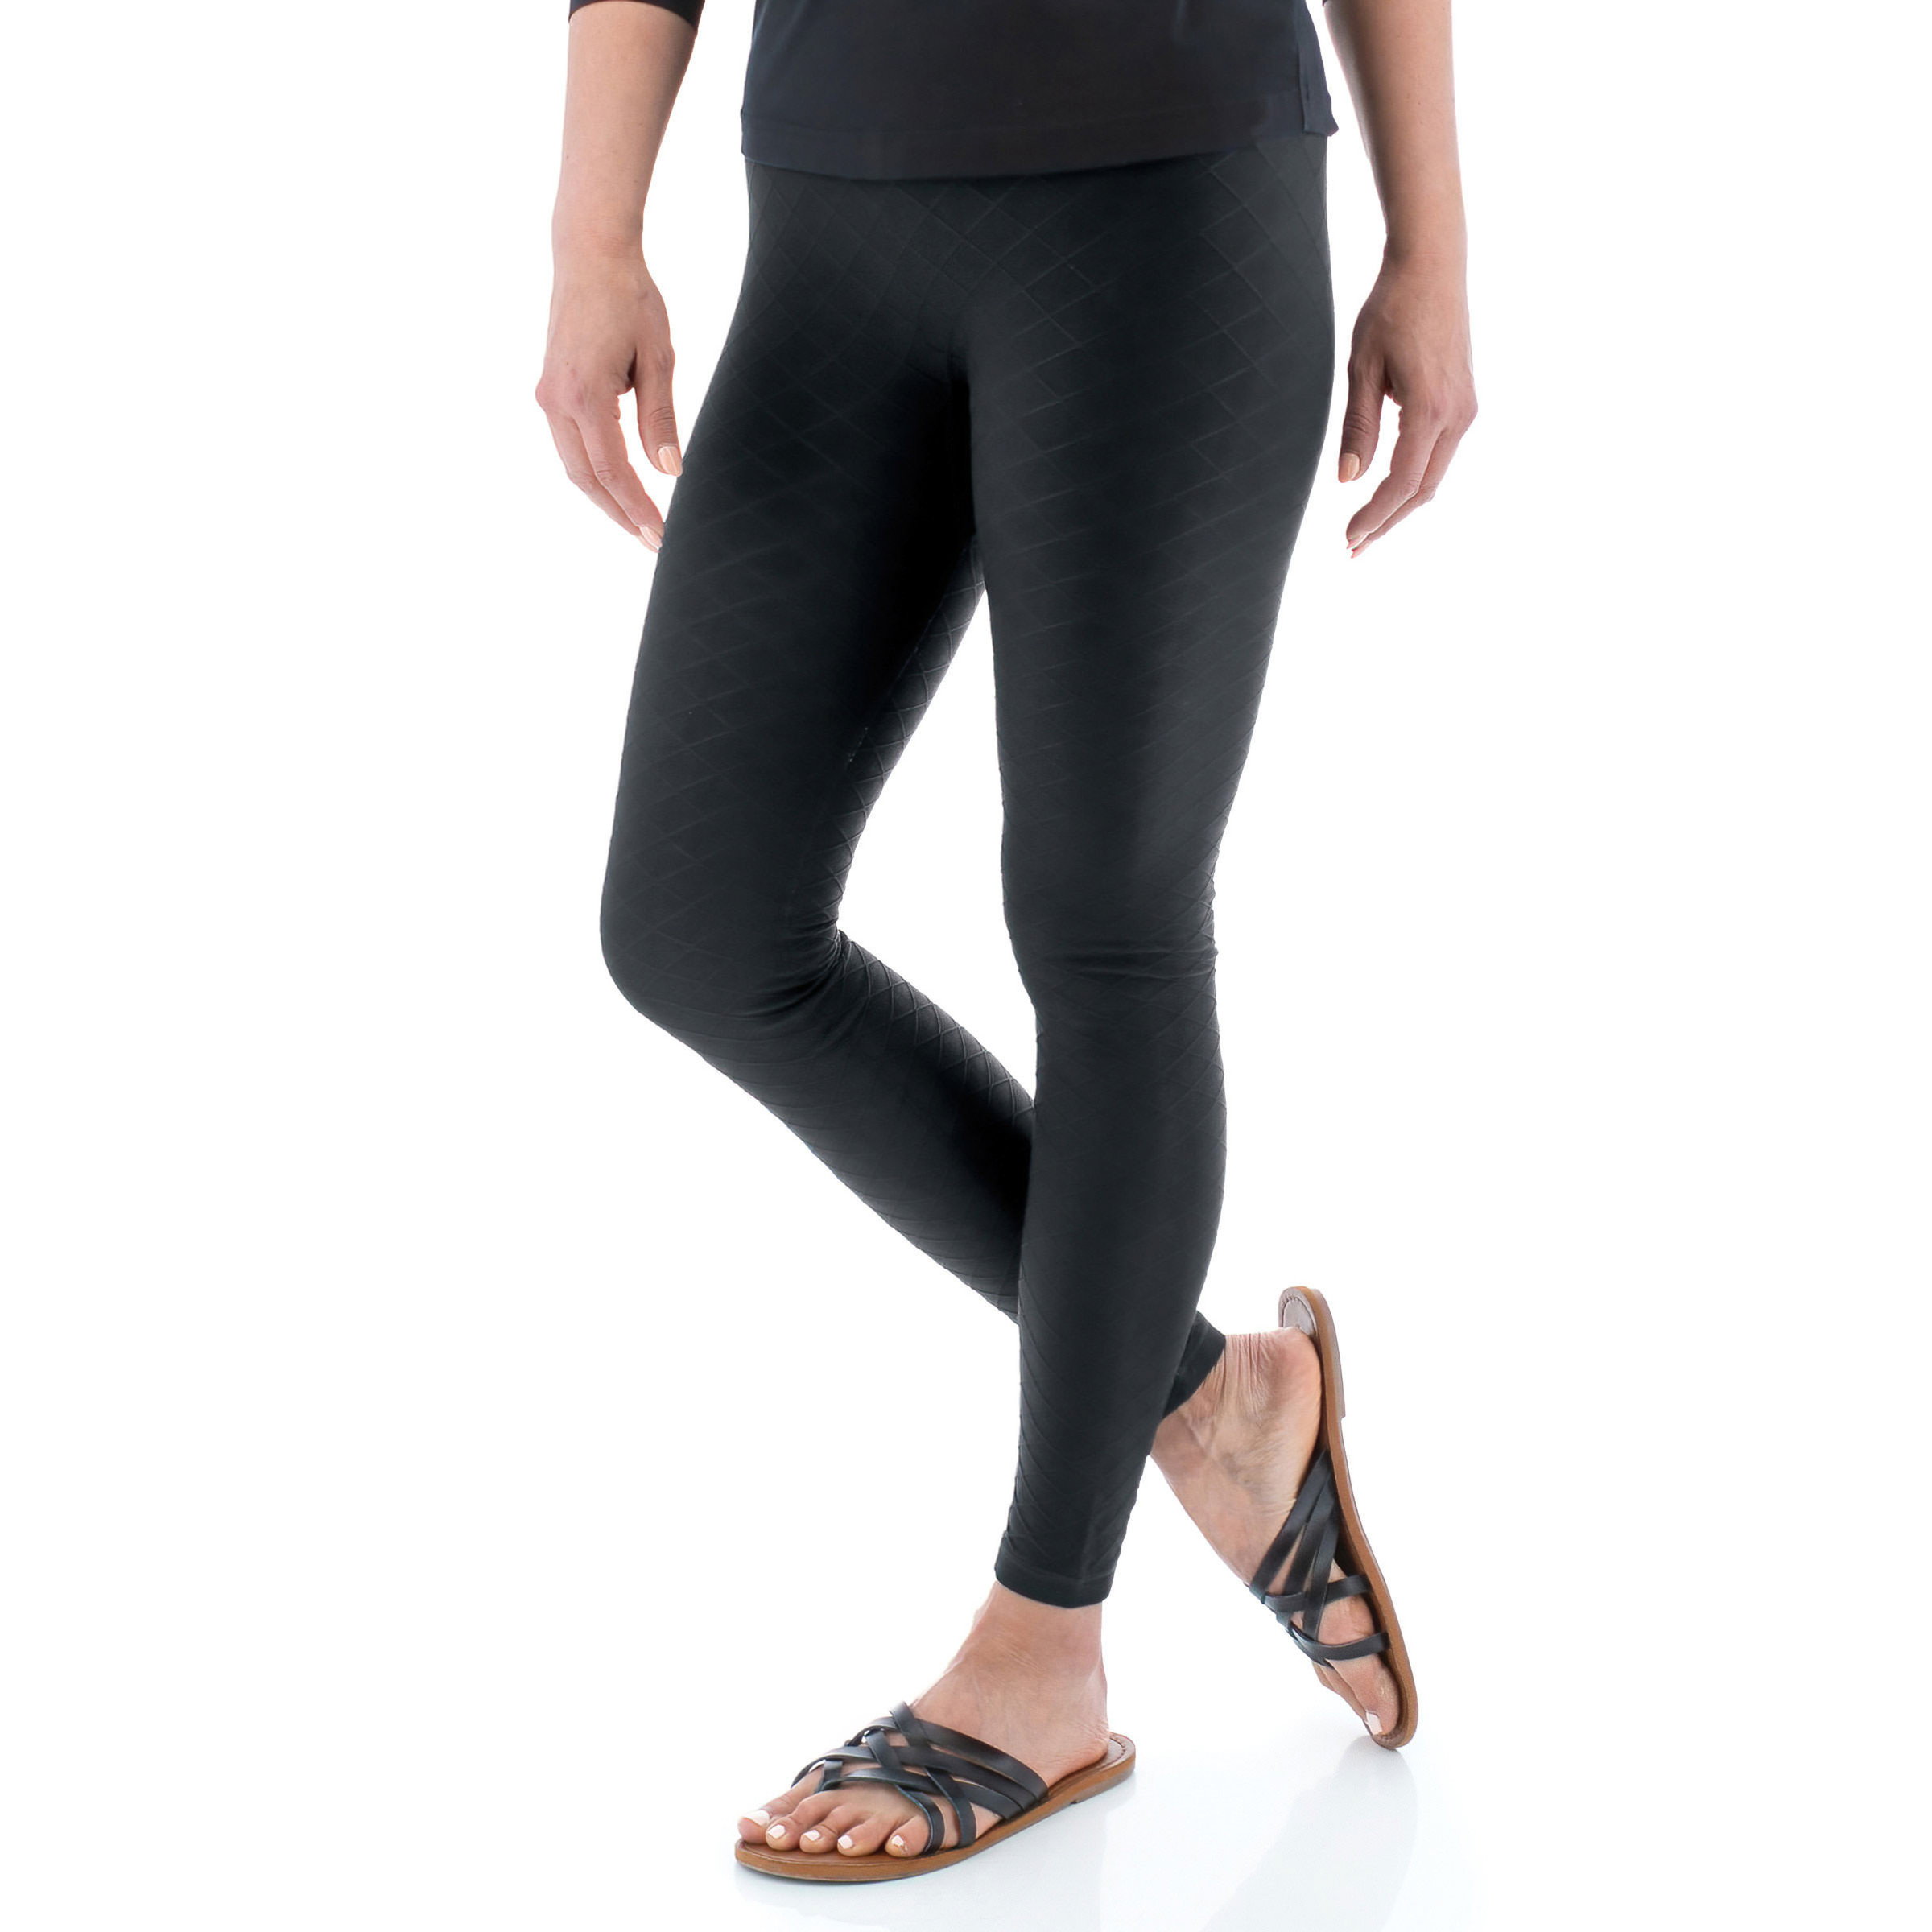 Women's Textured Footless Tights